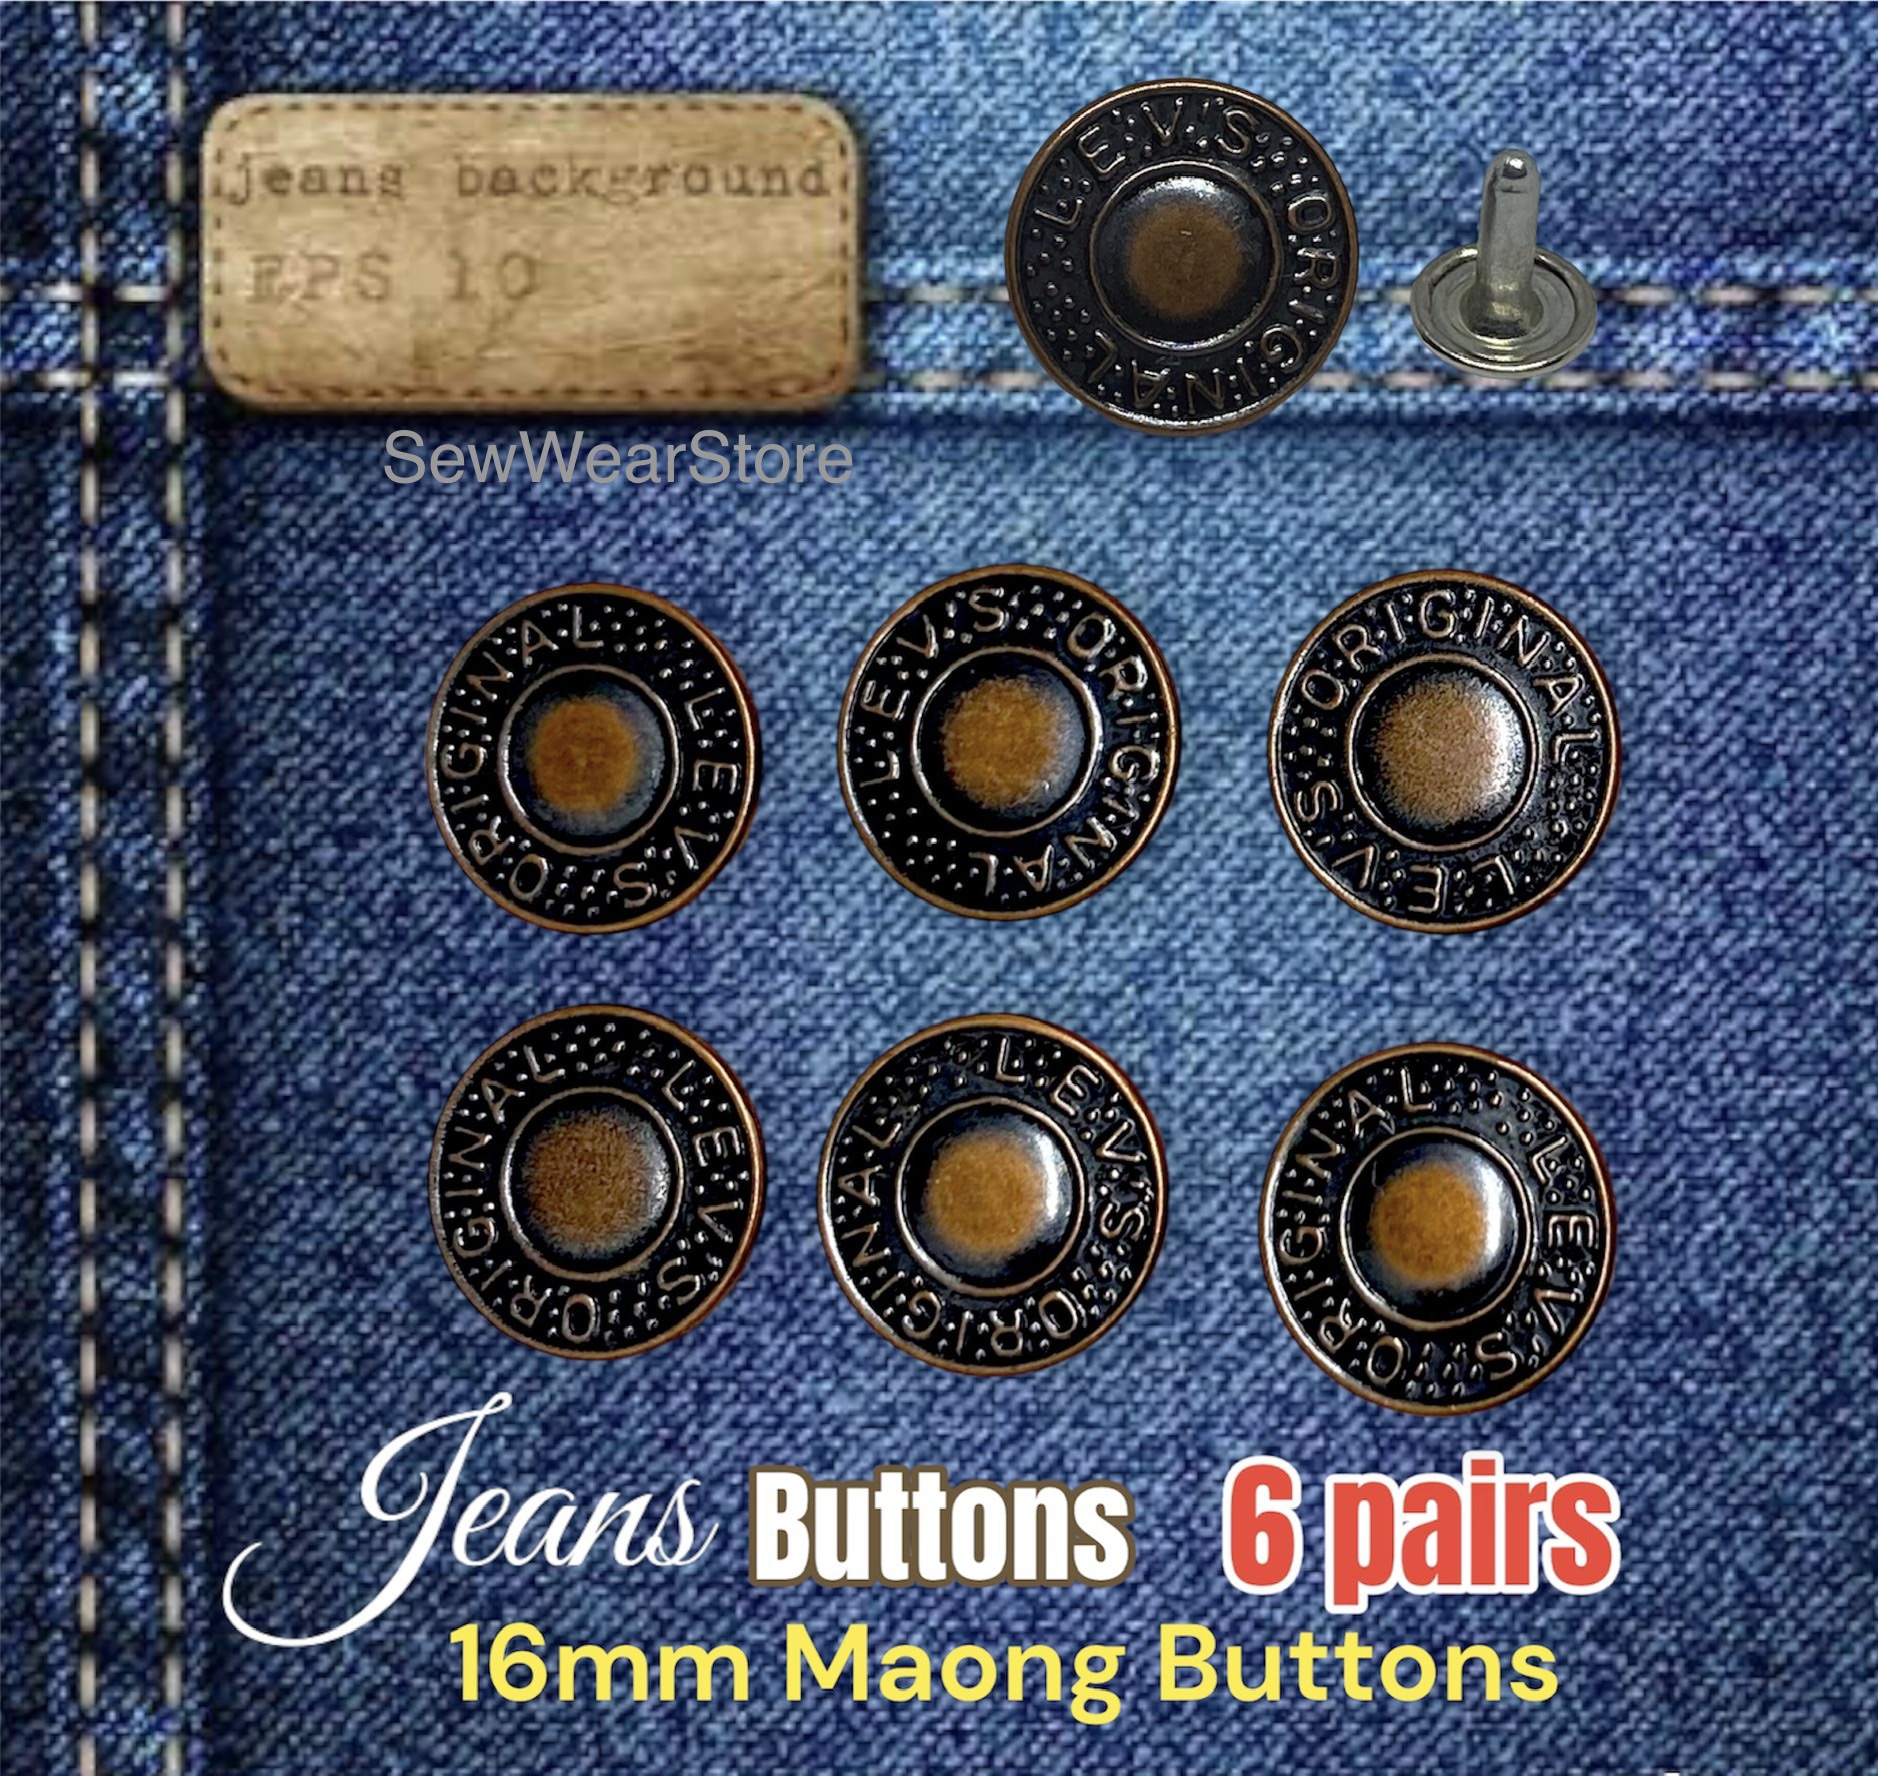 Jeans Button] Detachable 17mm Pants Button Replacement Jean Buttons No Sew  Instant Button by Sew Wear Store